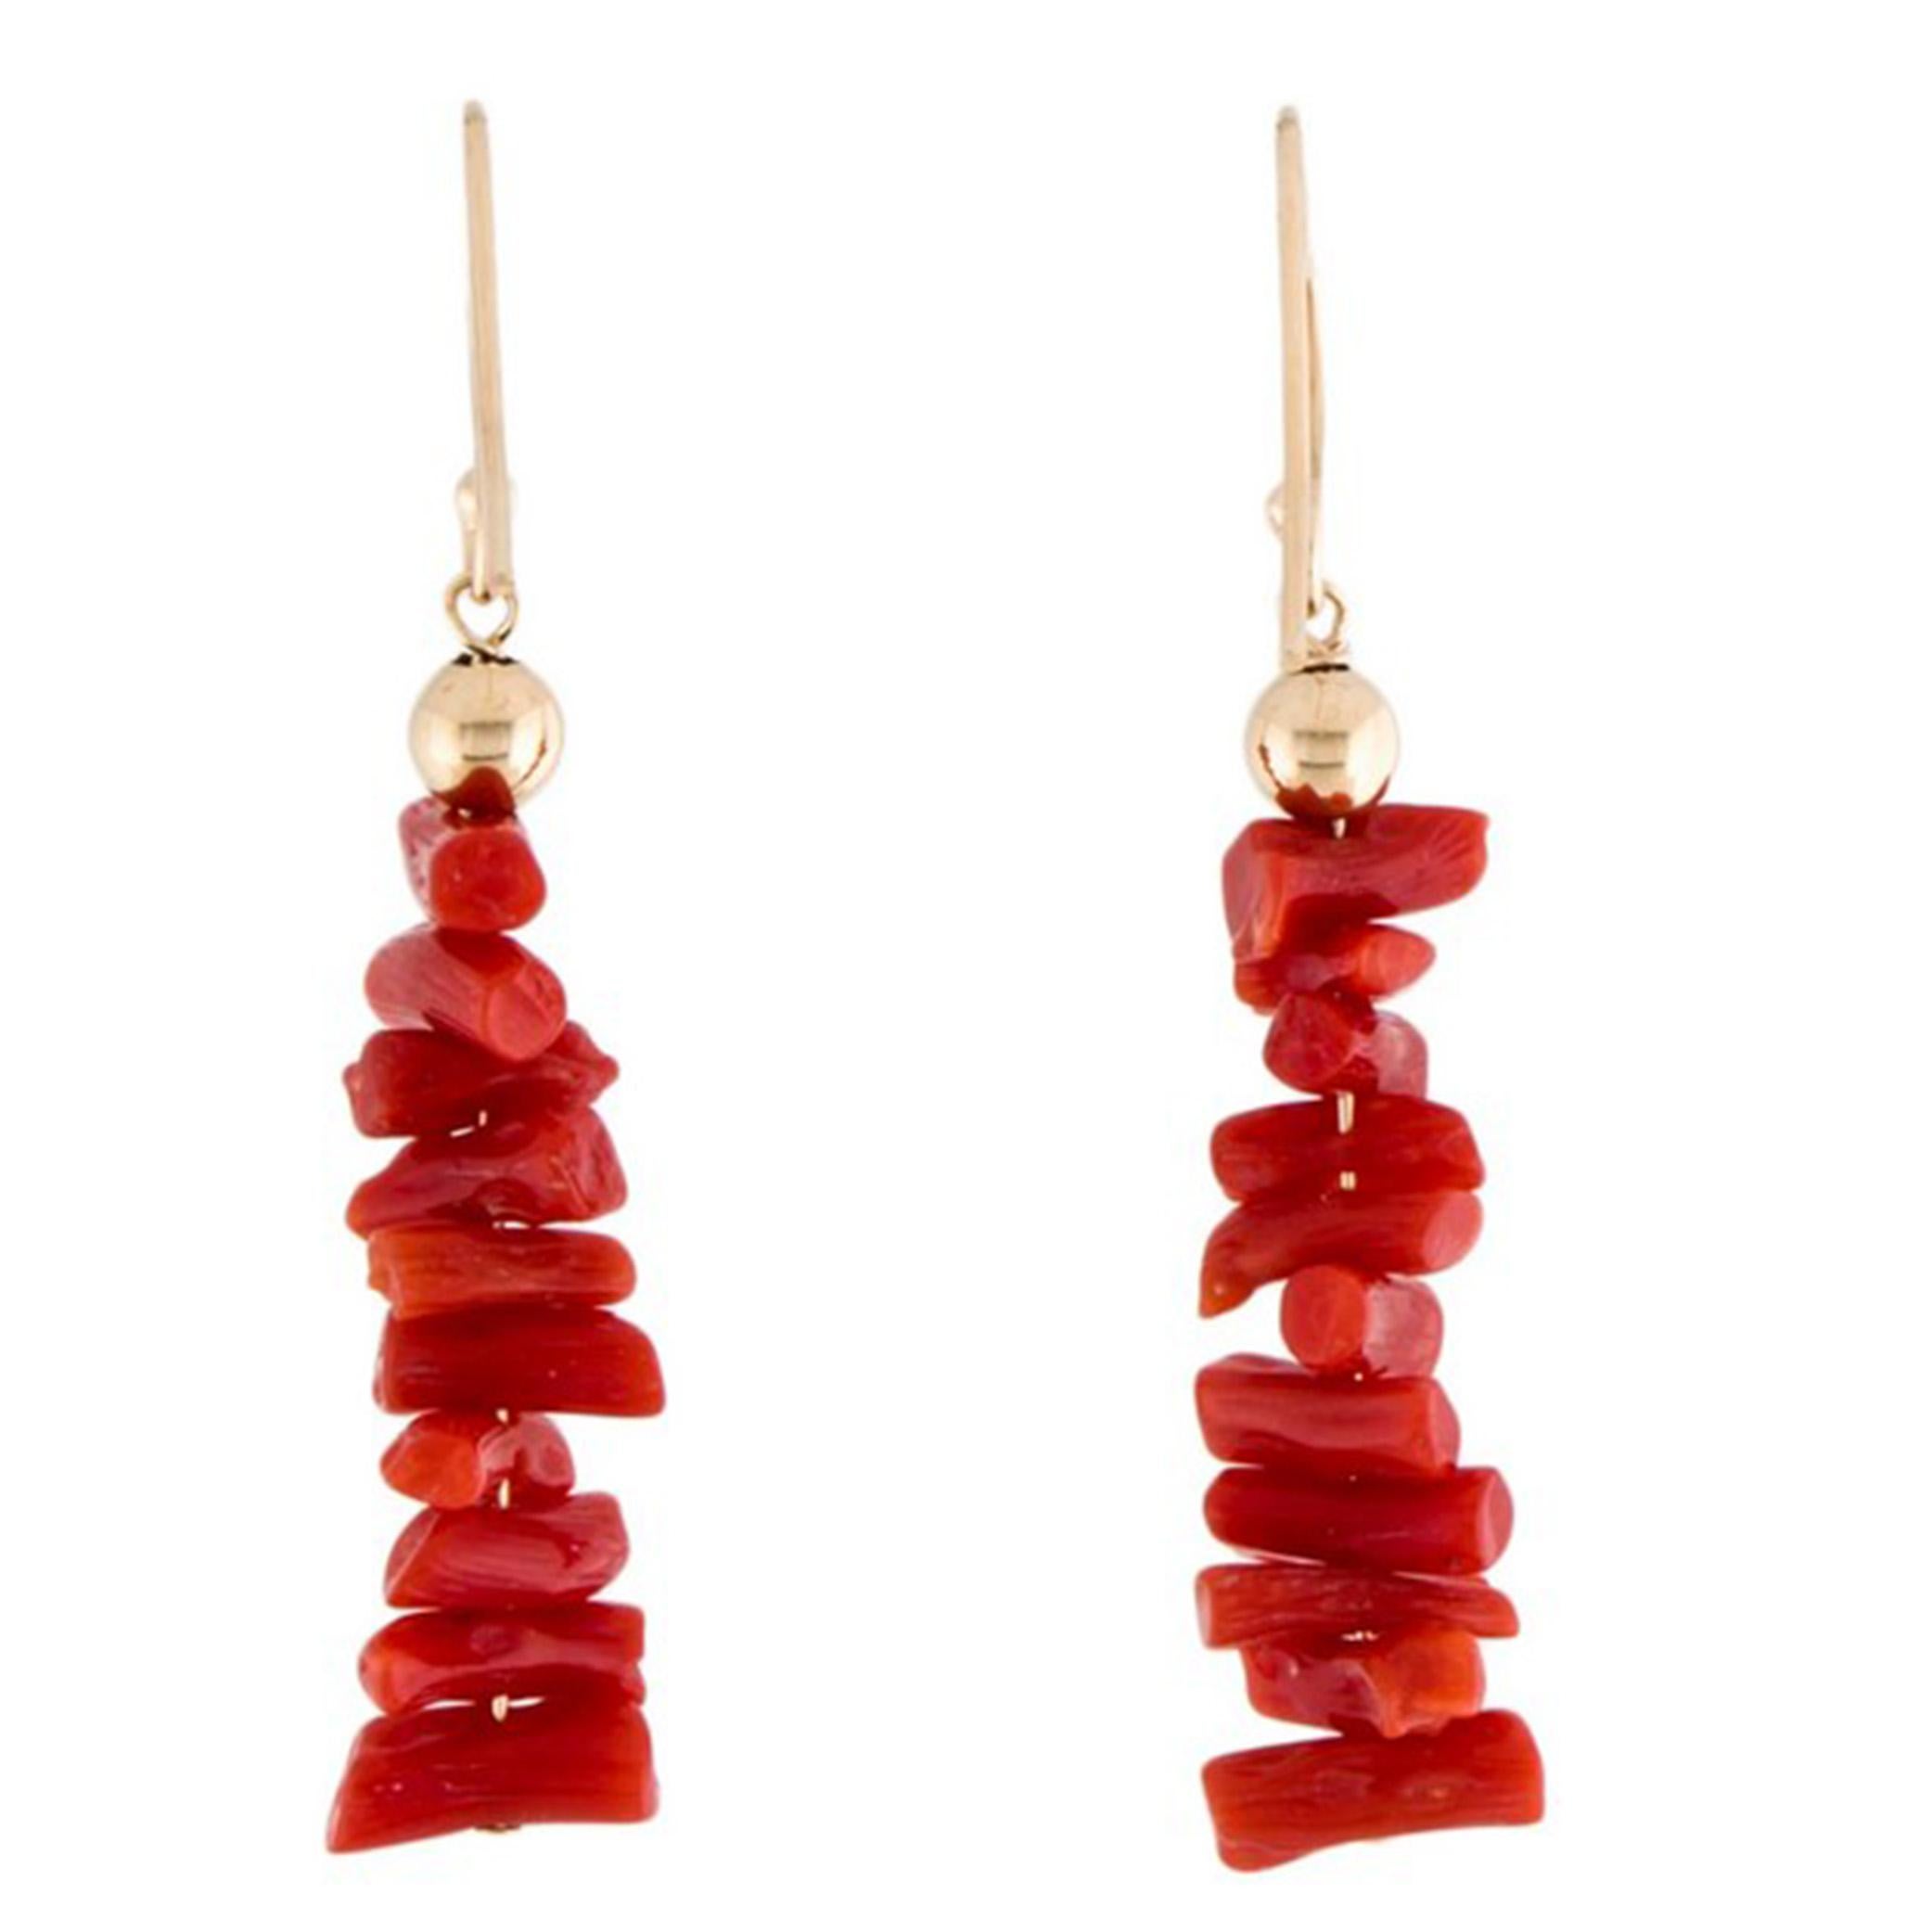 These earrings feature a stunning natural cayenne coral color earrings that dangles from a delicate 14k gold hook. The shape of the corals are sticks a very modern touch to them. The cayenne coral is a natural stone that is known for its vibrant